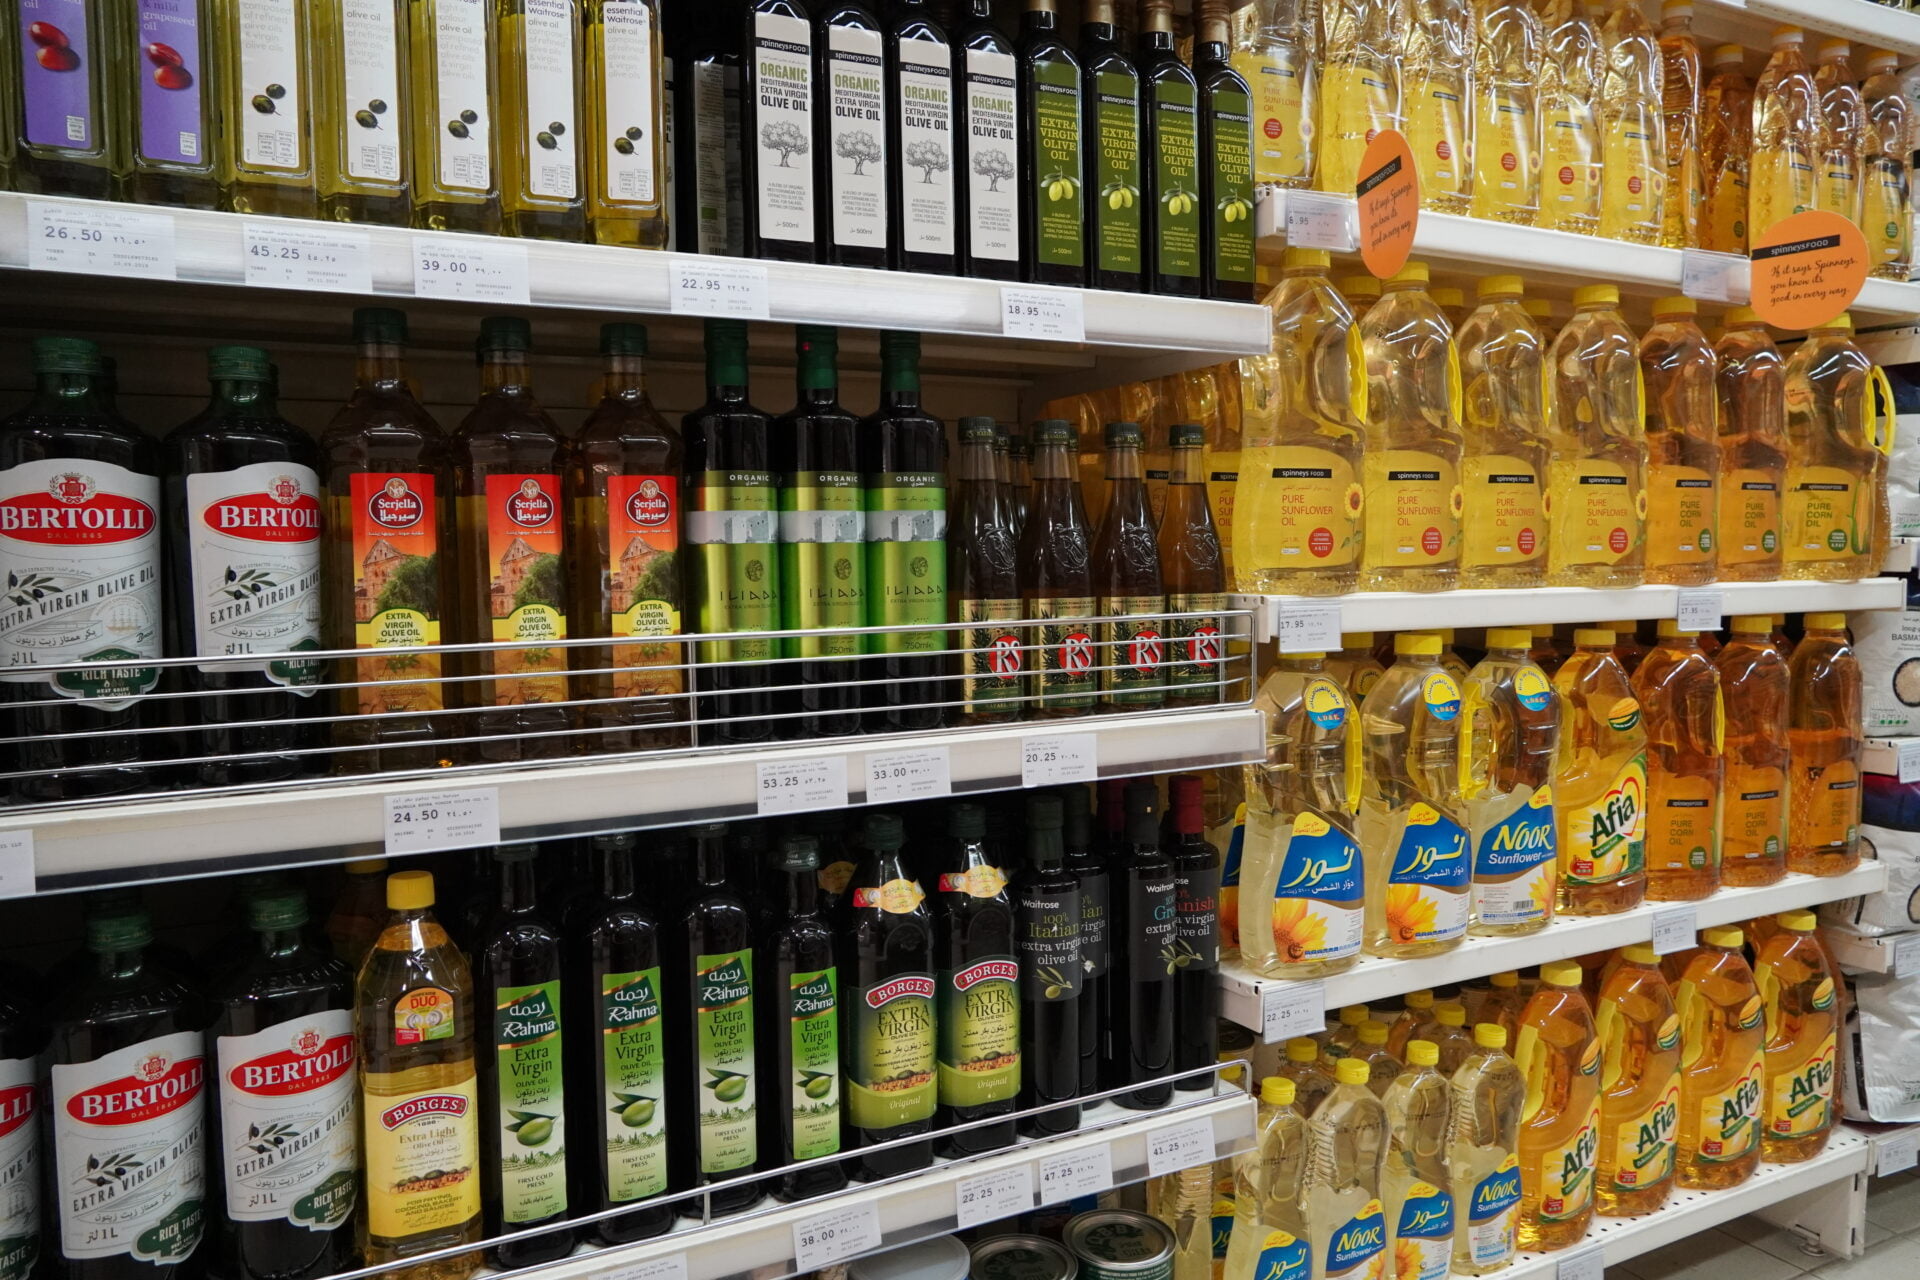 Bottles of cooking oils on sale at the grocery store